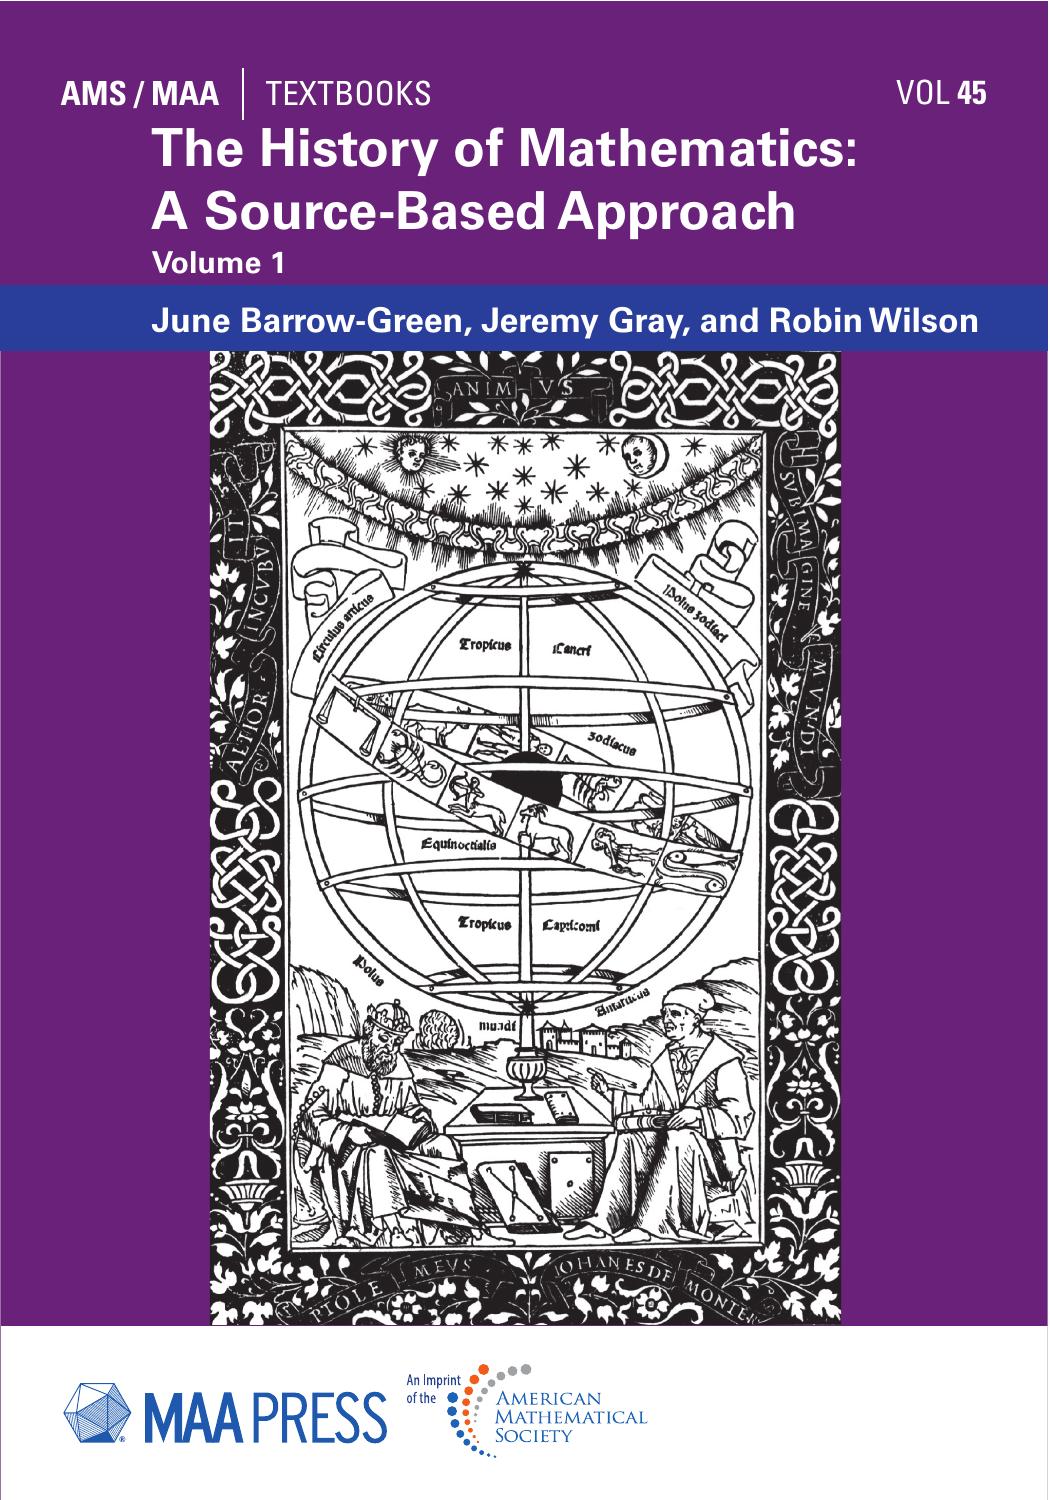 The History of Mathematics: A Source-Based Approach, Vol. 1